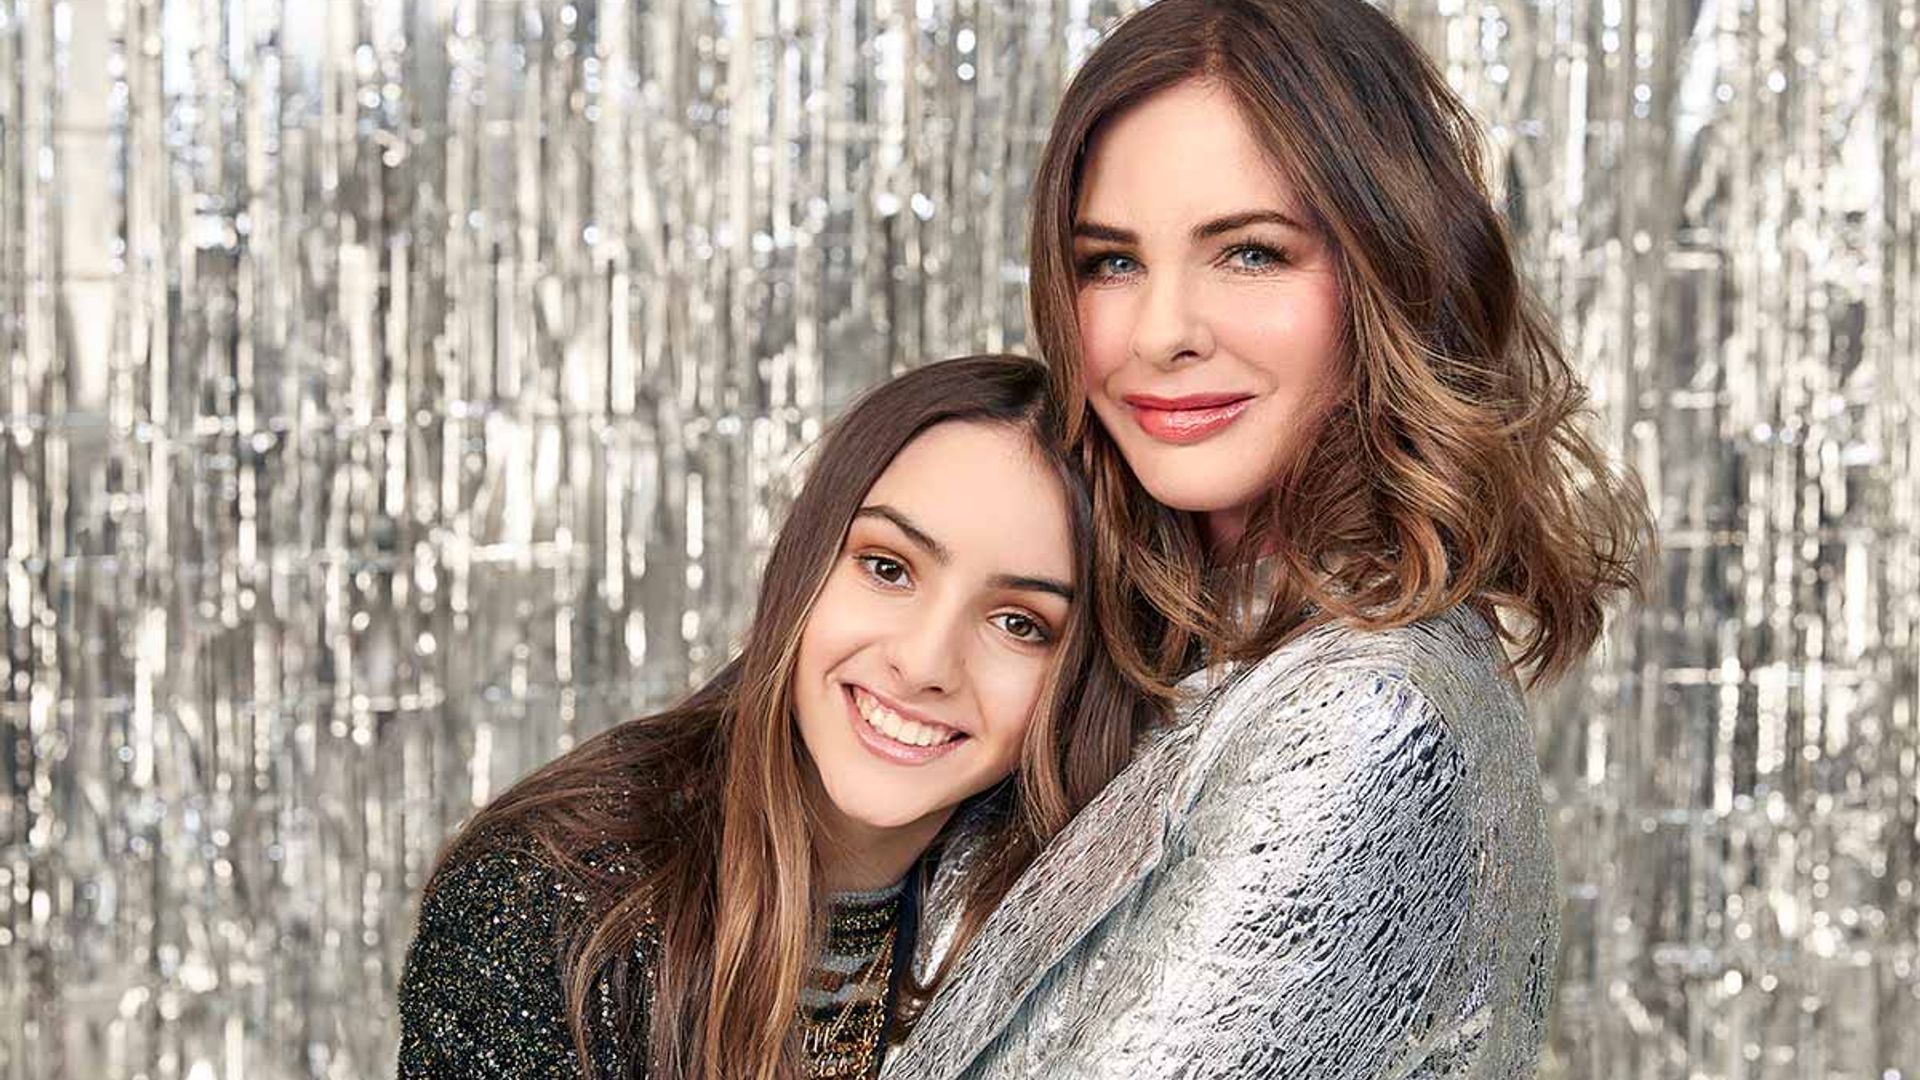 Trinny Woodall's daughter Lyla stars in her mum's new ad campaign